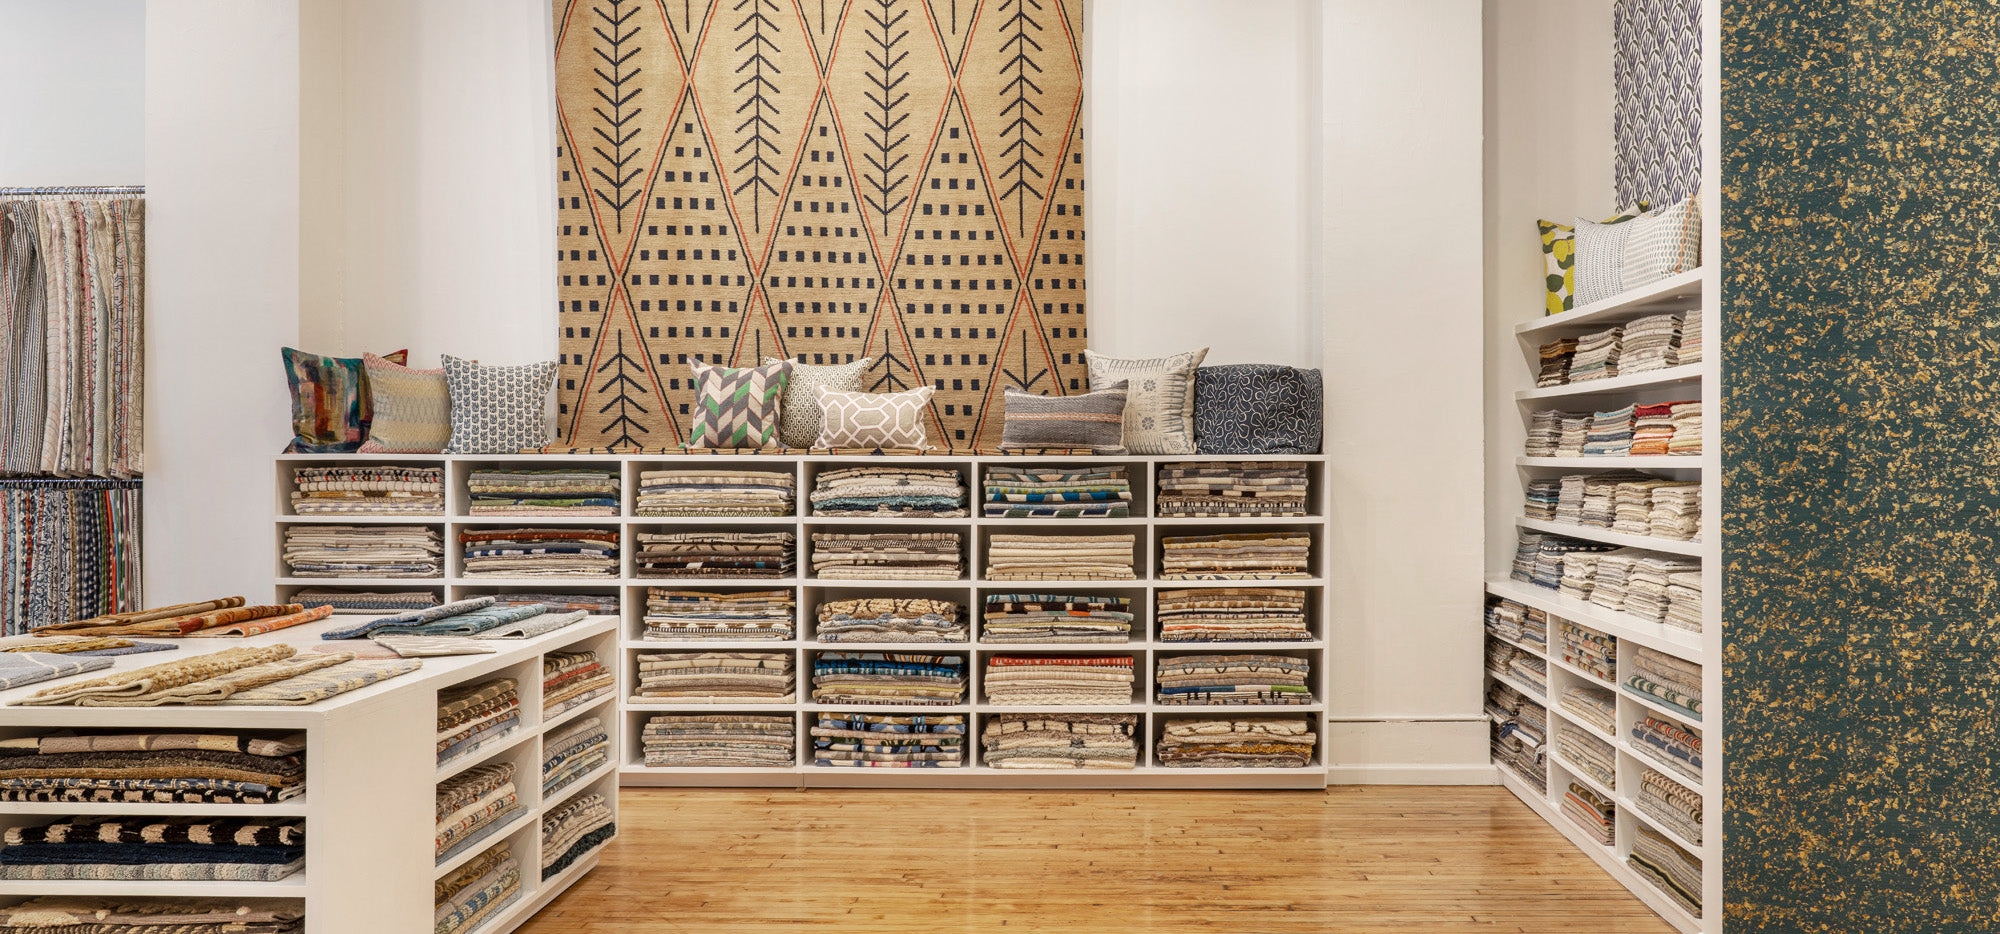 Photo of an interior design showroom with wooden shelves full of fabric and wallpaper swatches, and topped with throw pillows.